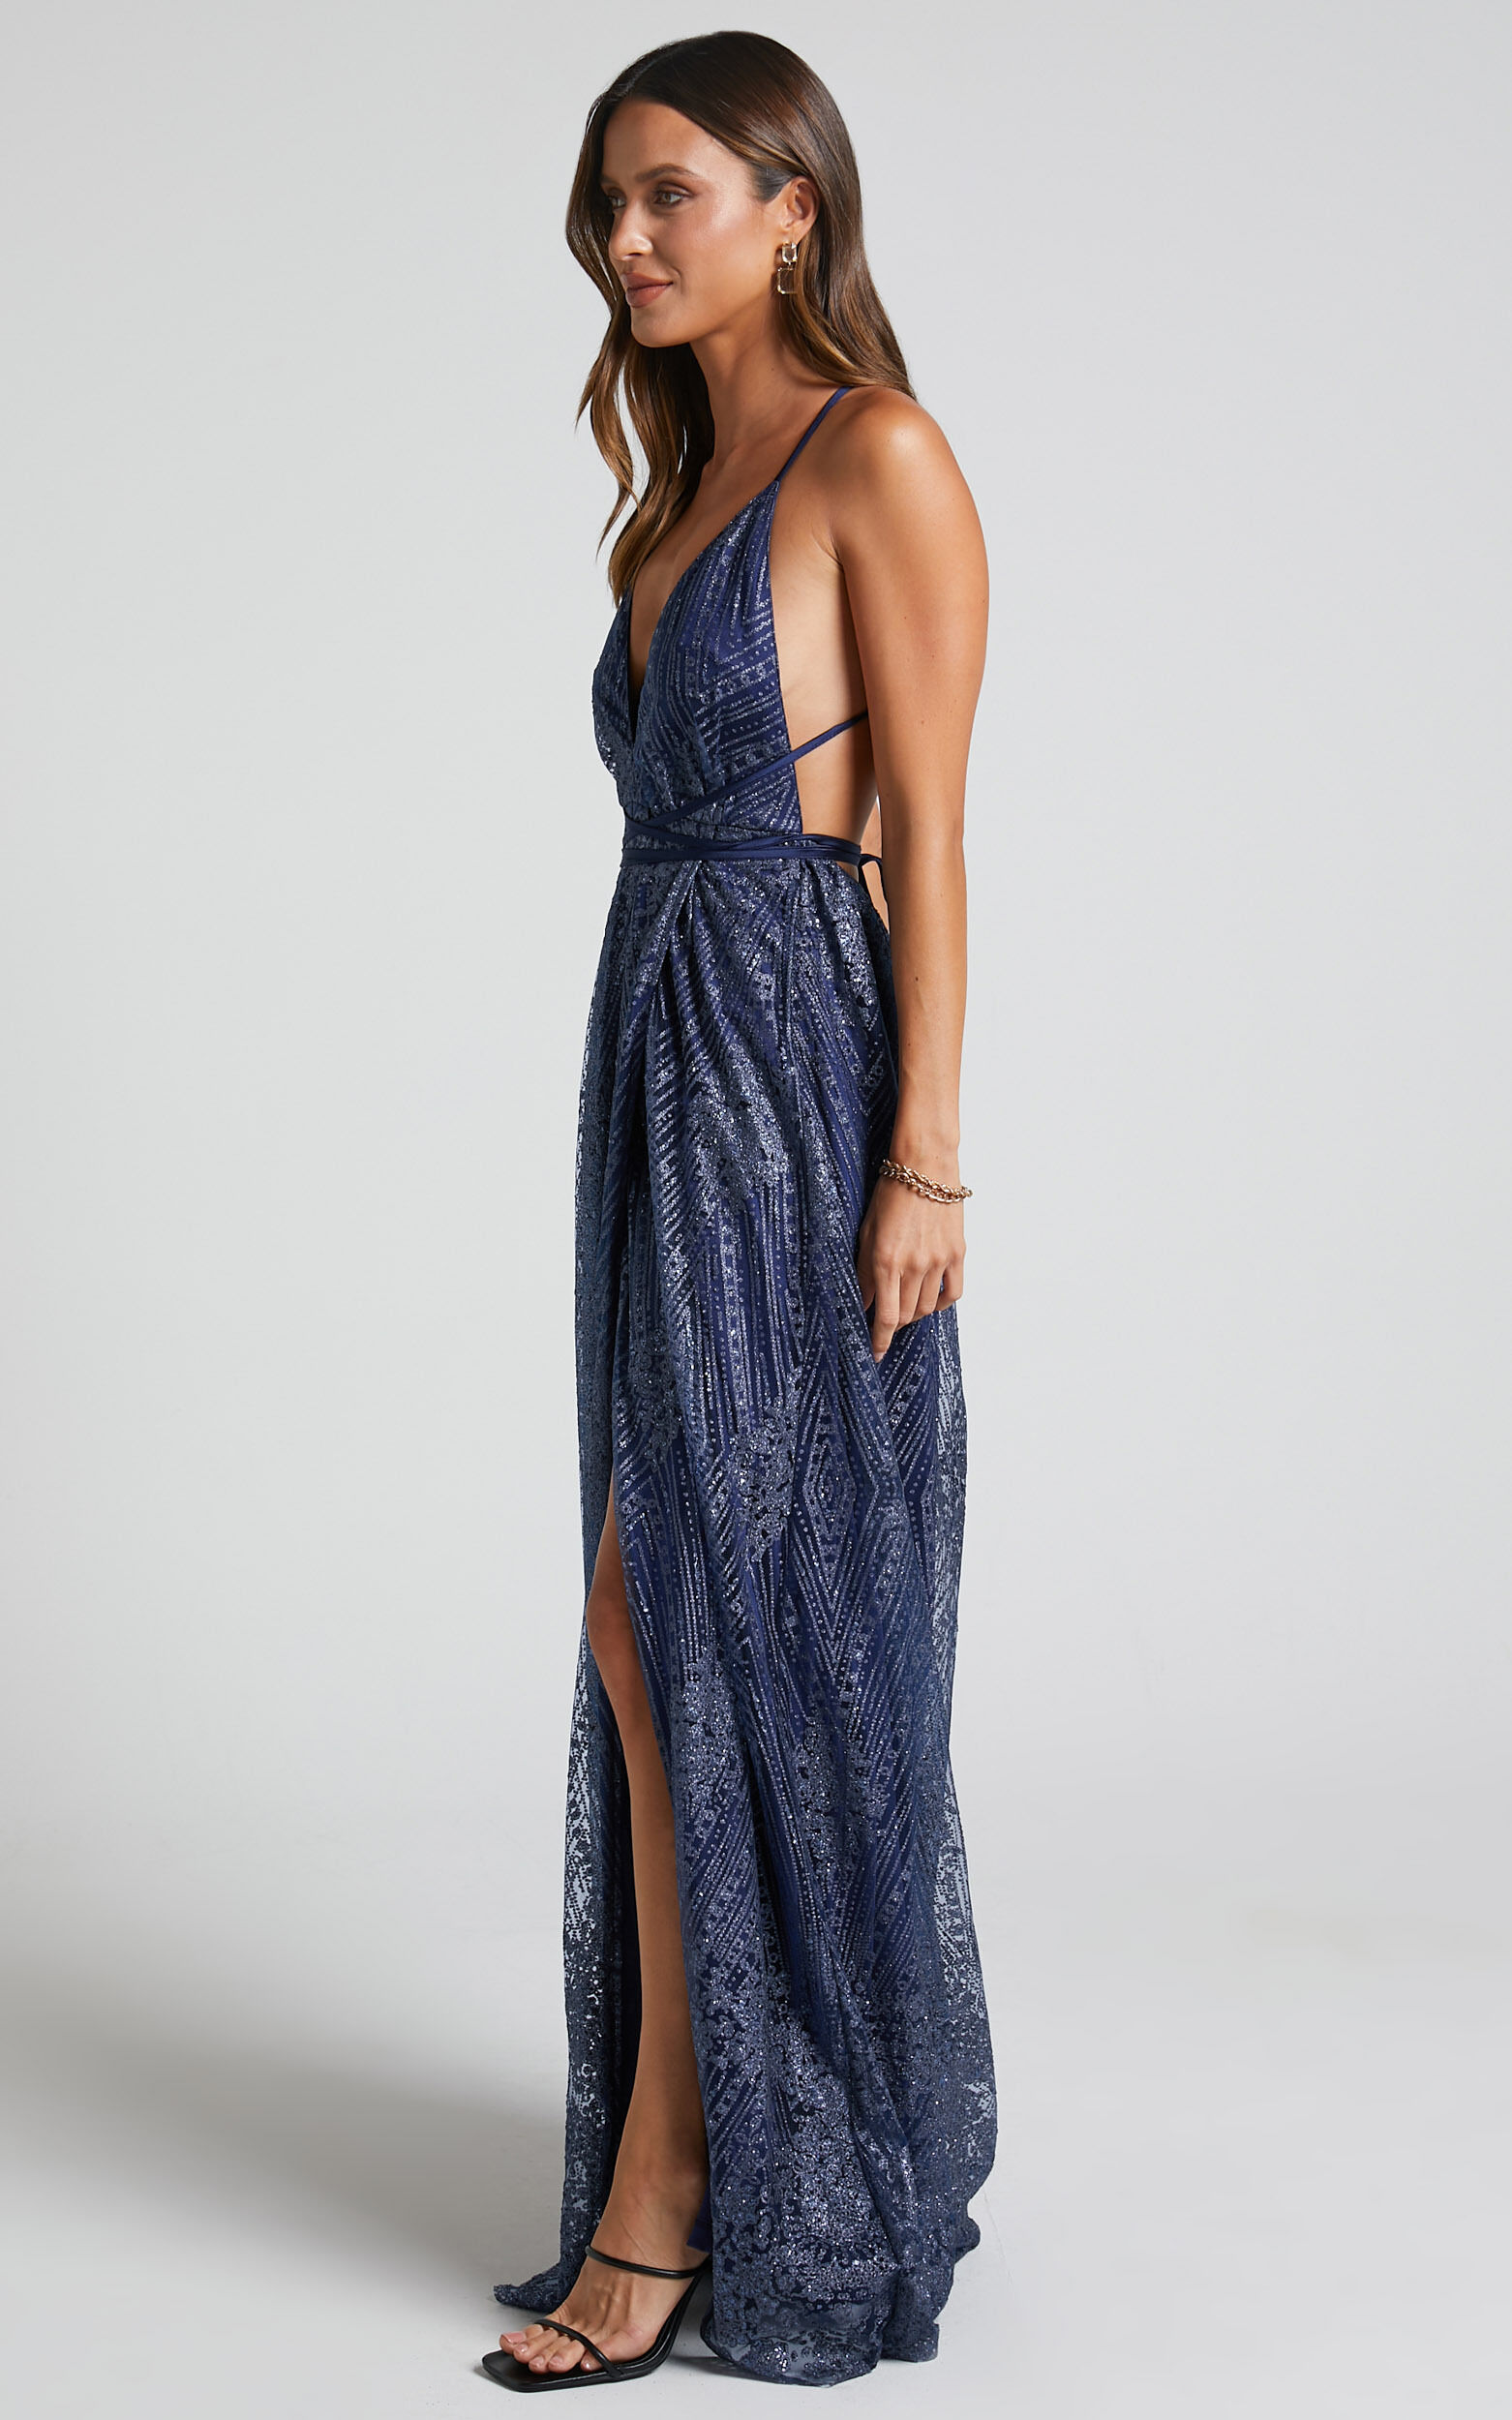 New York Nights Plunge Cross Back Maxi Dress in Navy - 04, NVY1, super-hi-res image number null